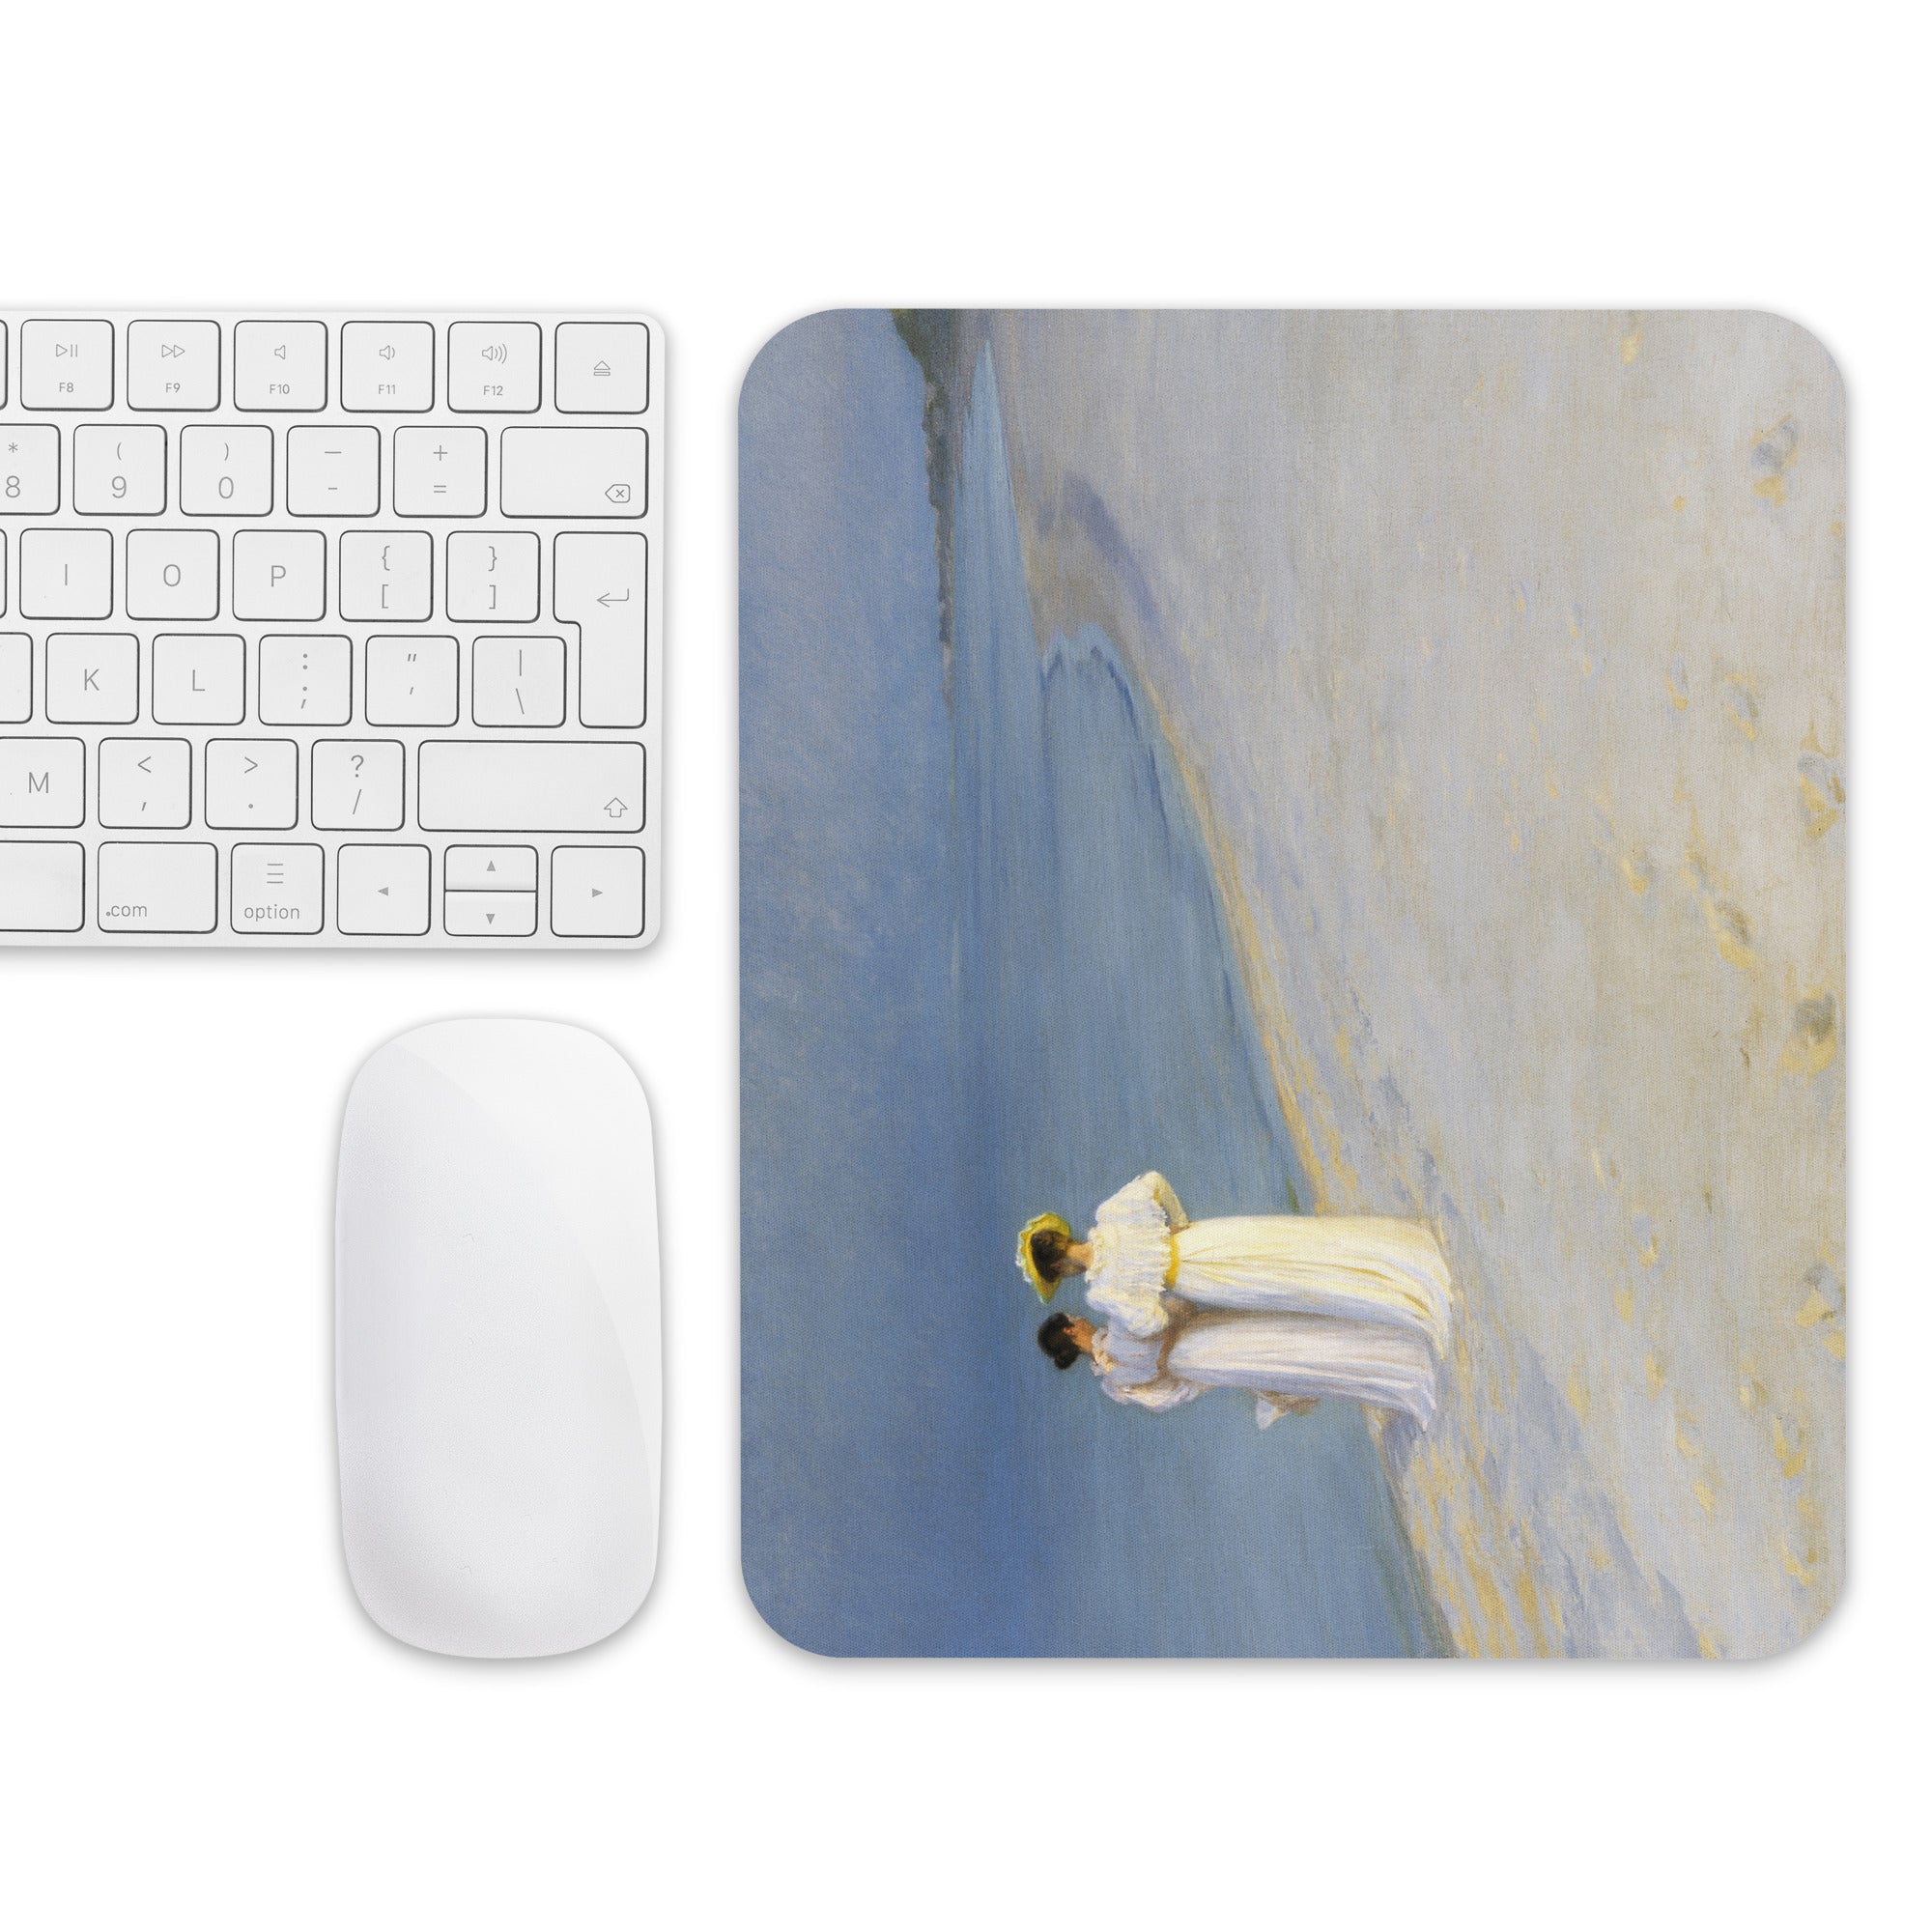 Famous Painting Mouse Pad | Premium Art Mouse Pad P.S. Krøyer 'Summer Evening on Skagen's Southern Beach'